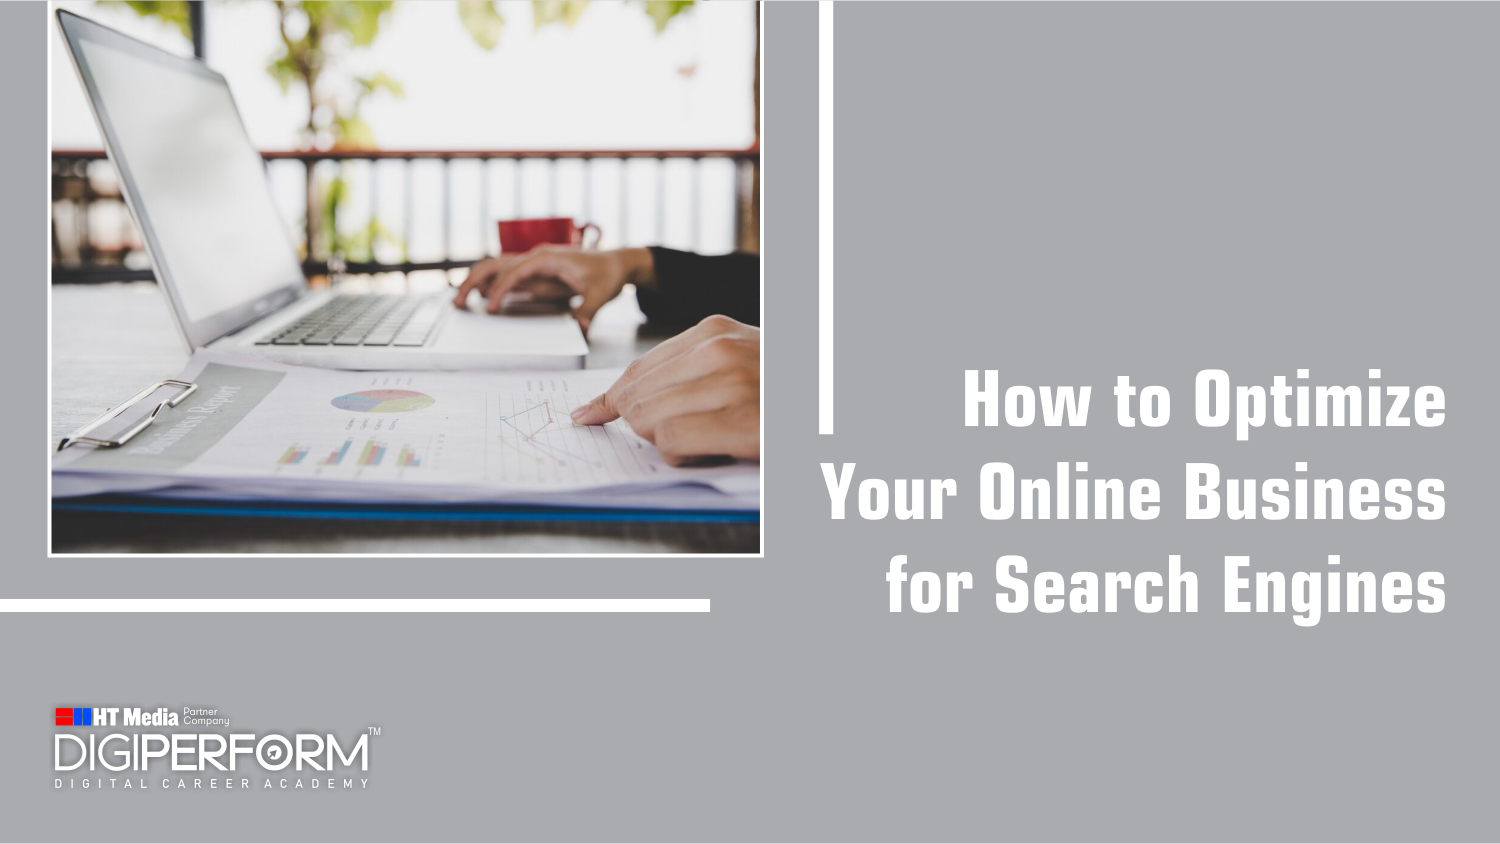 How to Optimize Your Online Business for Search Engines